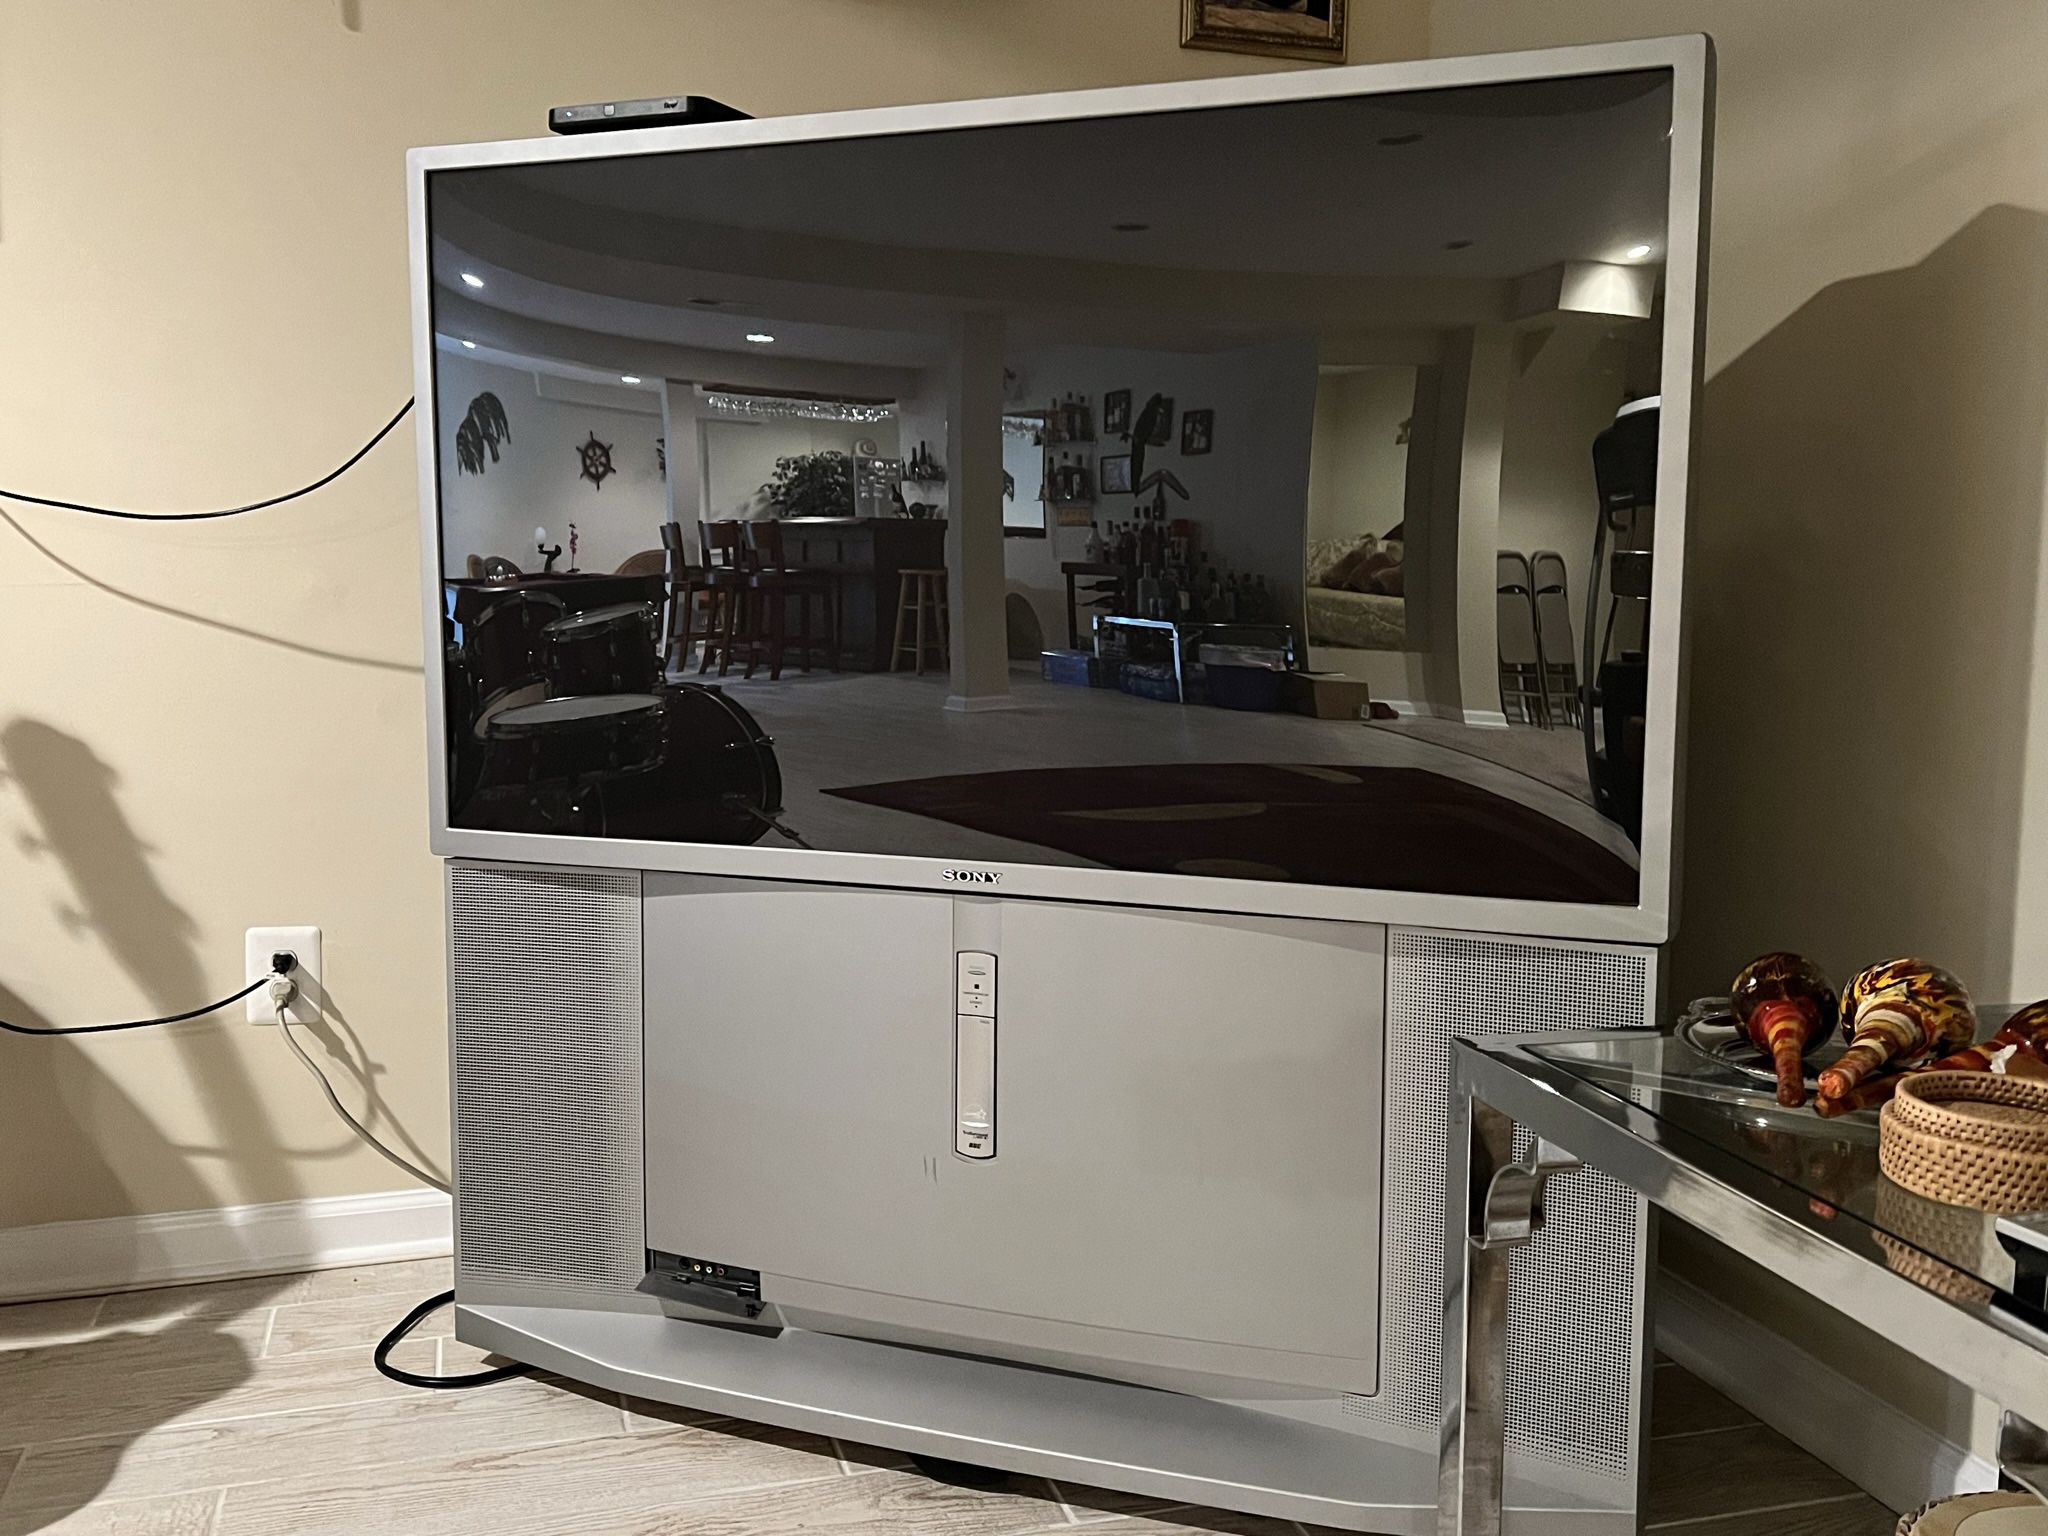 59” screen Projection Sony TV for sale 